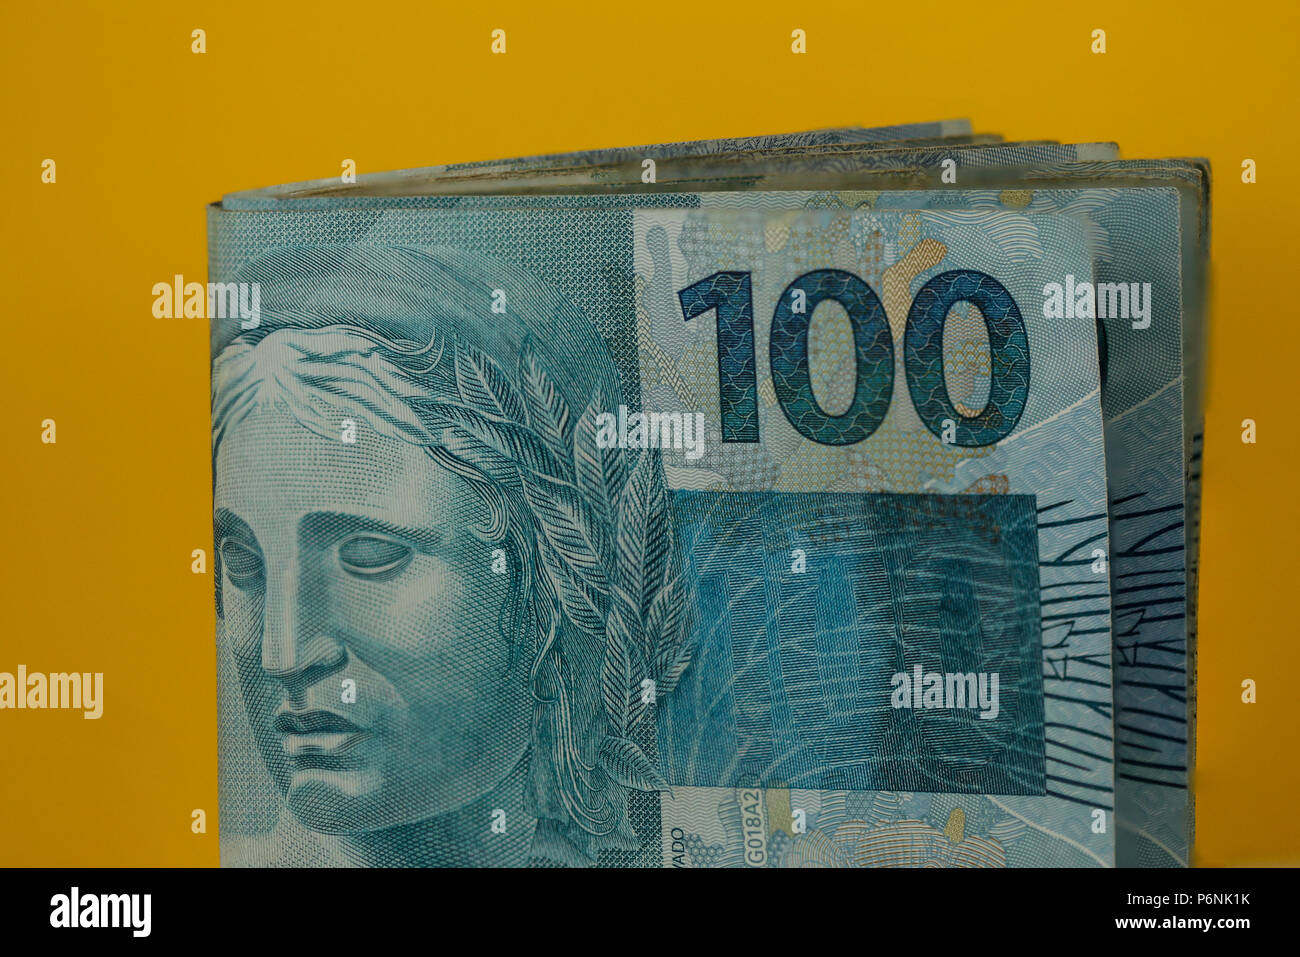 100 Real Money Notes from Brazil. Brazilian Money. Image of notes of Real, the official currency of Brazil since 1994. Notes of 100 Reais. Stock Photo